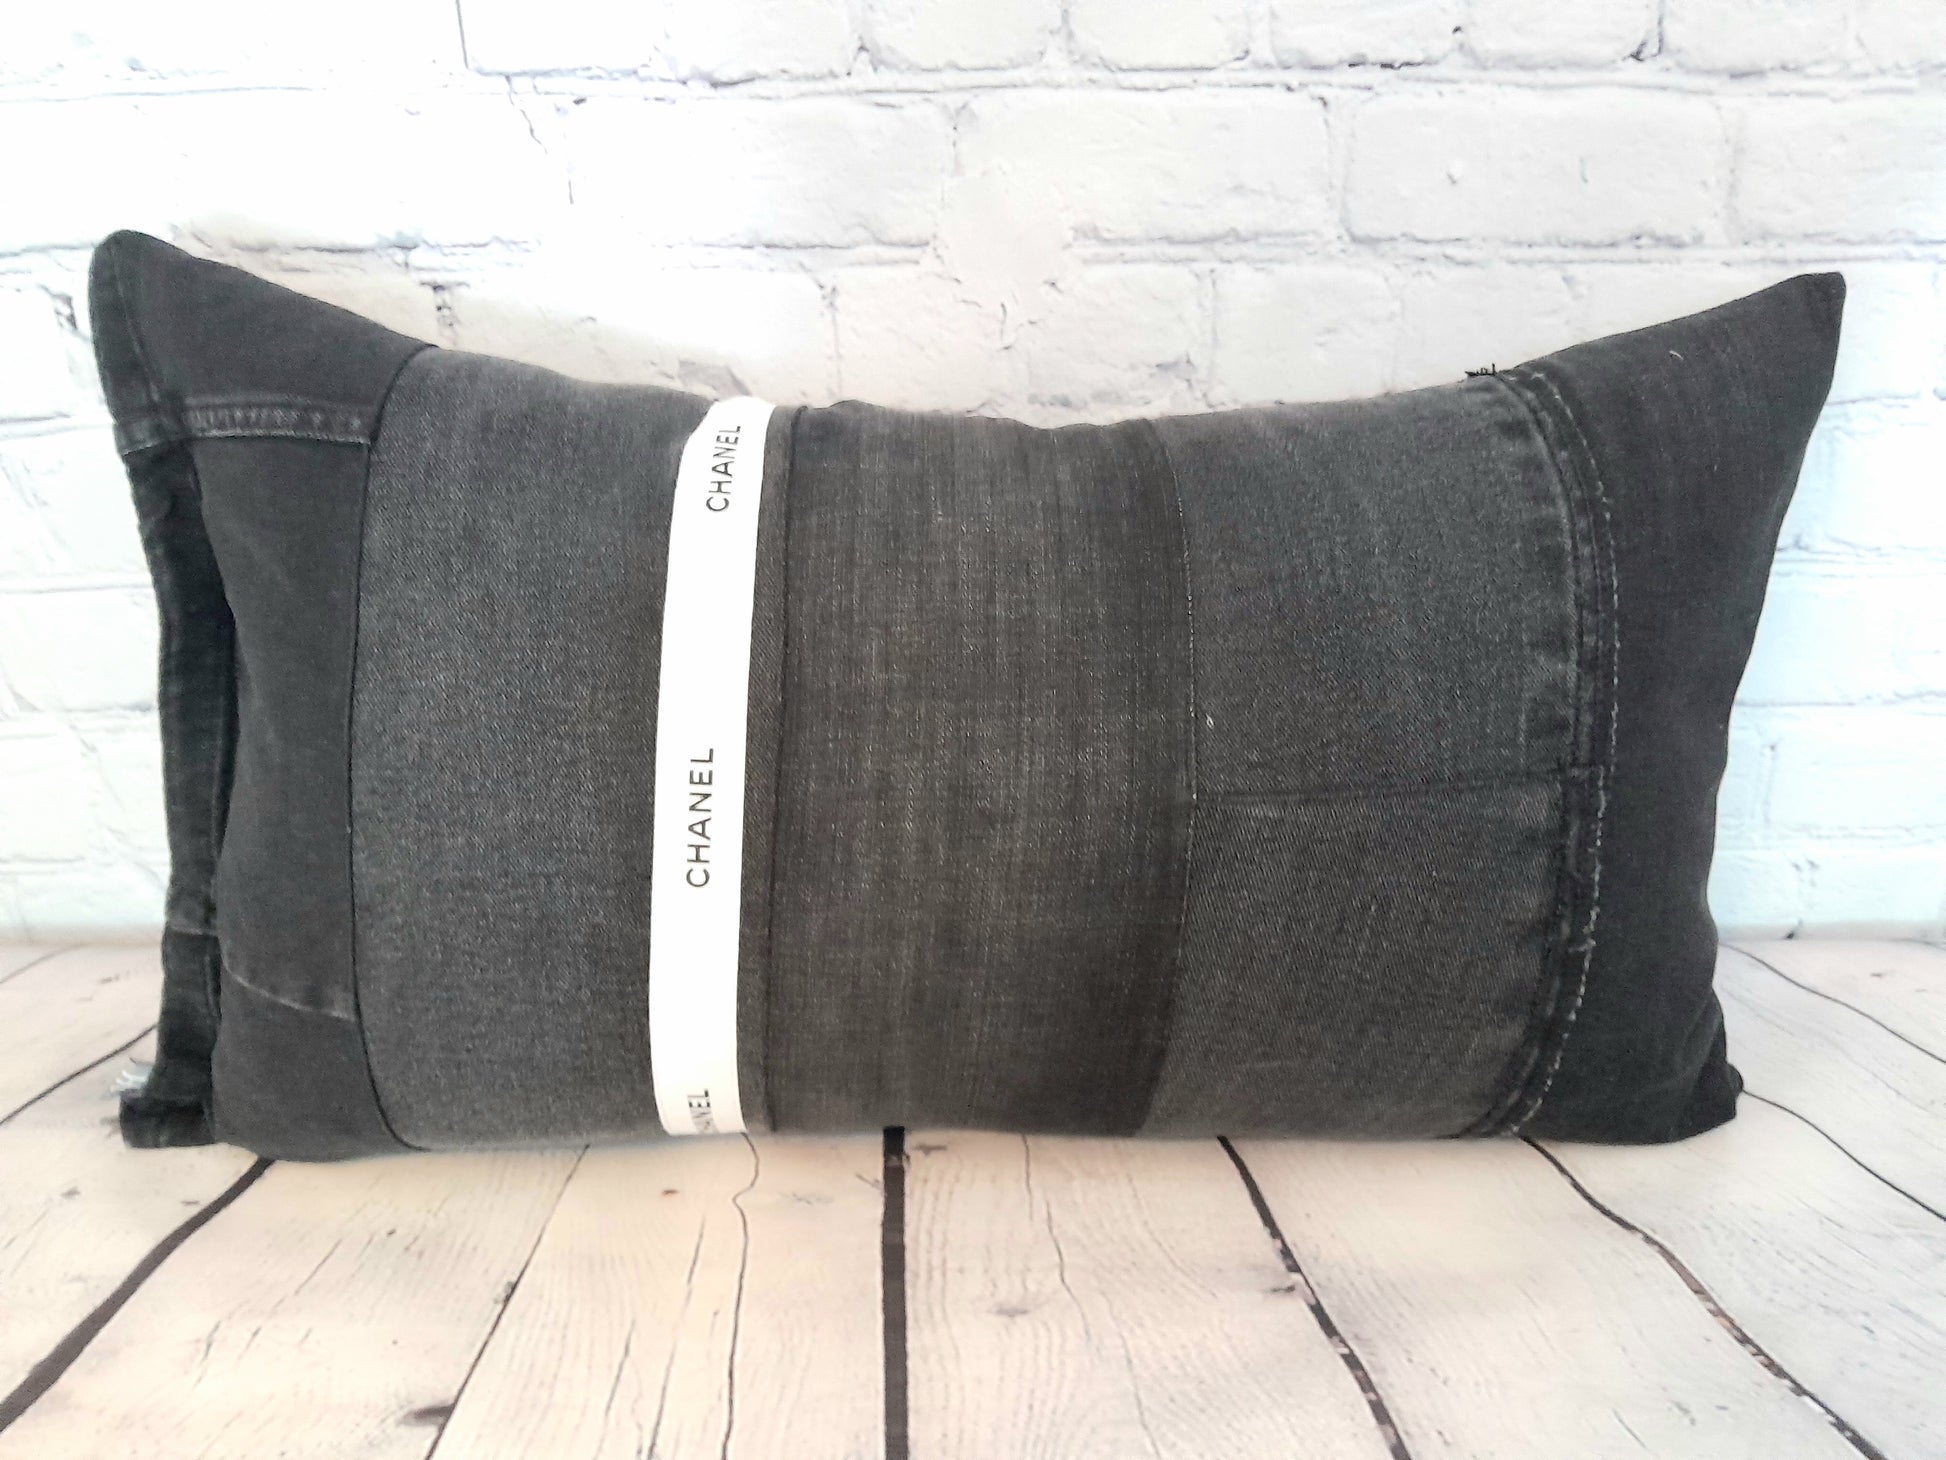 Vintage denim saved from going into landfill upcycled into unique patchwork denim bolster cushion pillows.  Black and white.